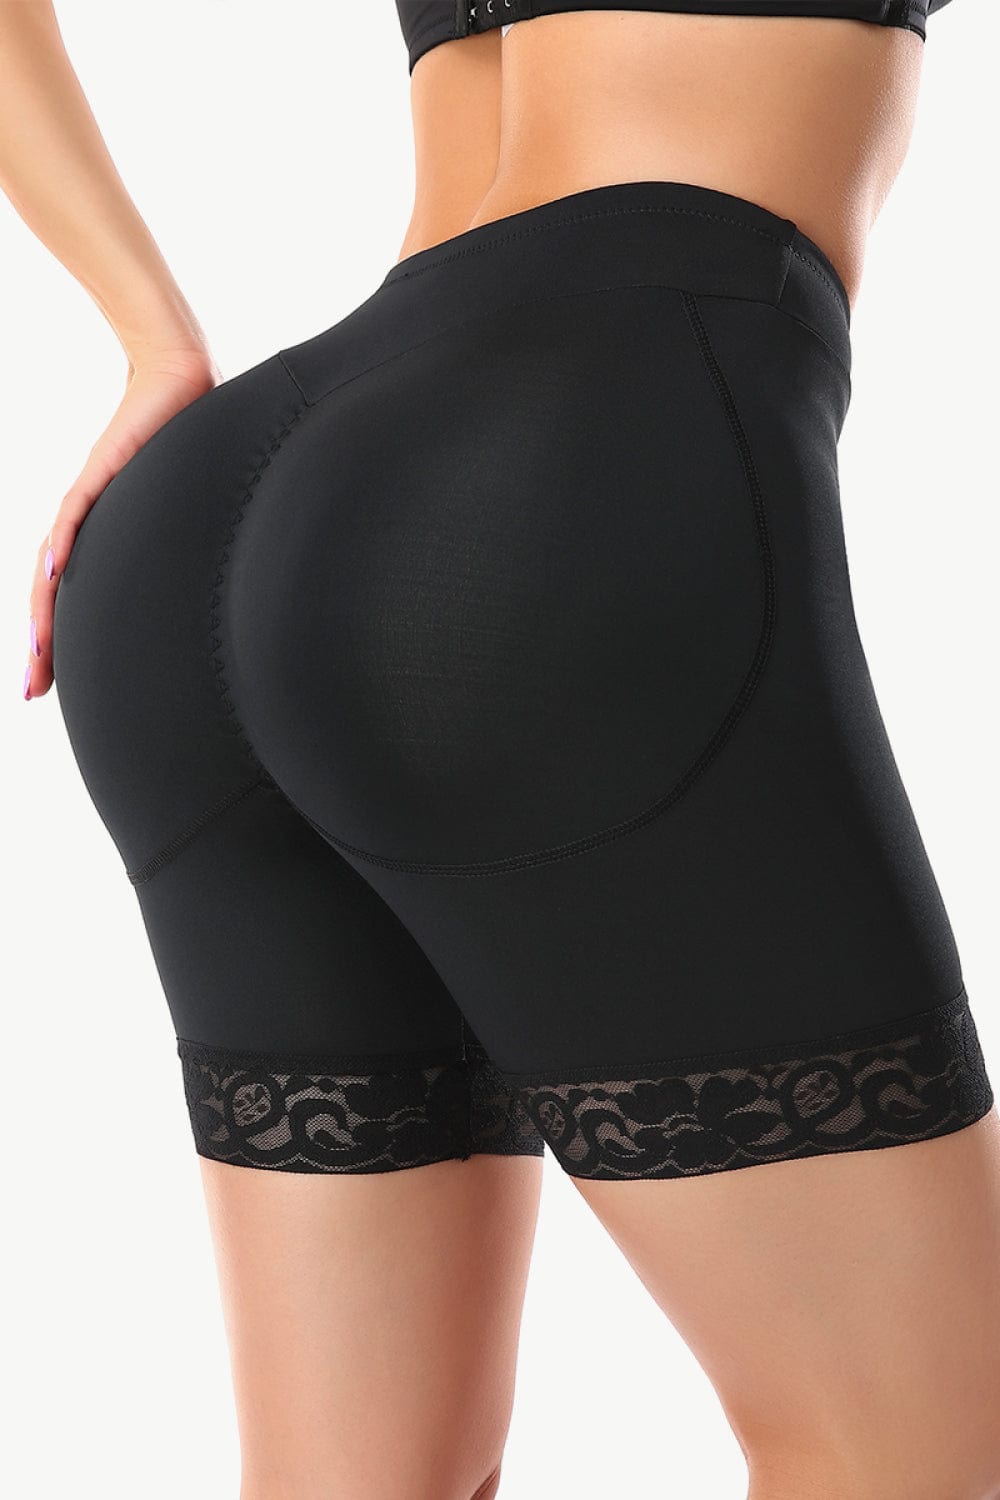 "Image of Unique Klture Full Size Lace Trim Lifting Pull-On Shaping Shorts. These high-waisted shorts feature intricate lace trim and offer comfortable pull-on styling. Designed for a flattering fit and shaping effect. Perfect blend of style and comfort for any occasion. Available in a range of sizes to cater to diverse body types."